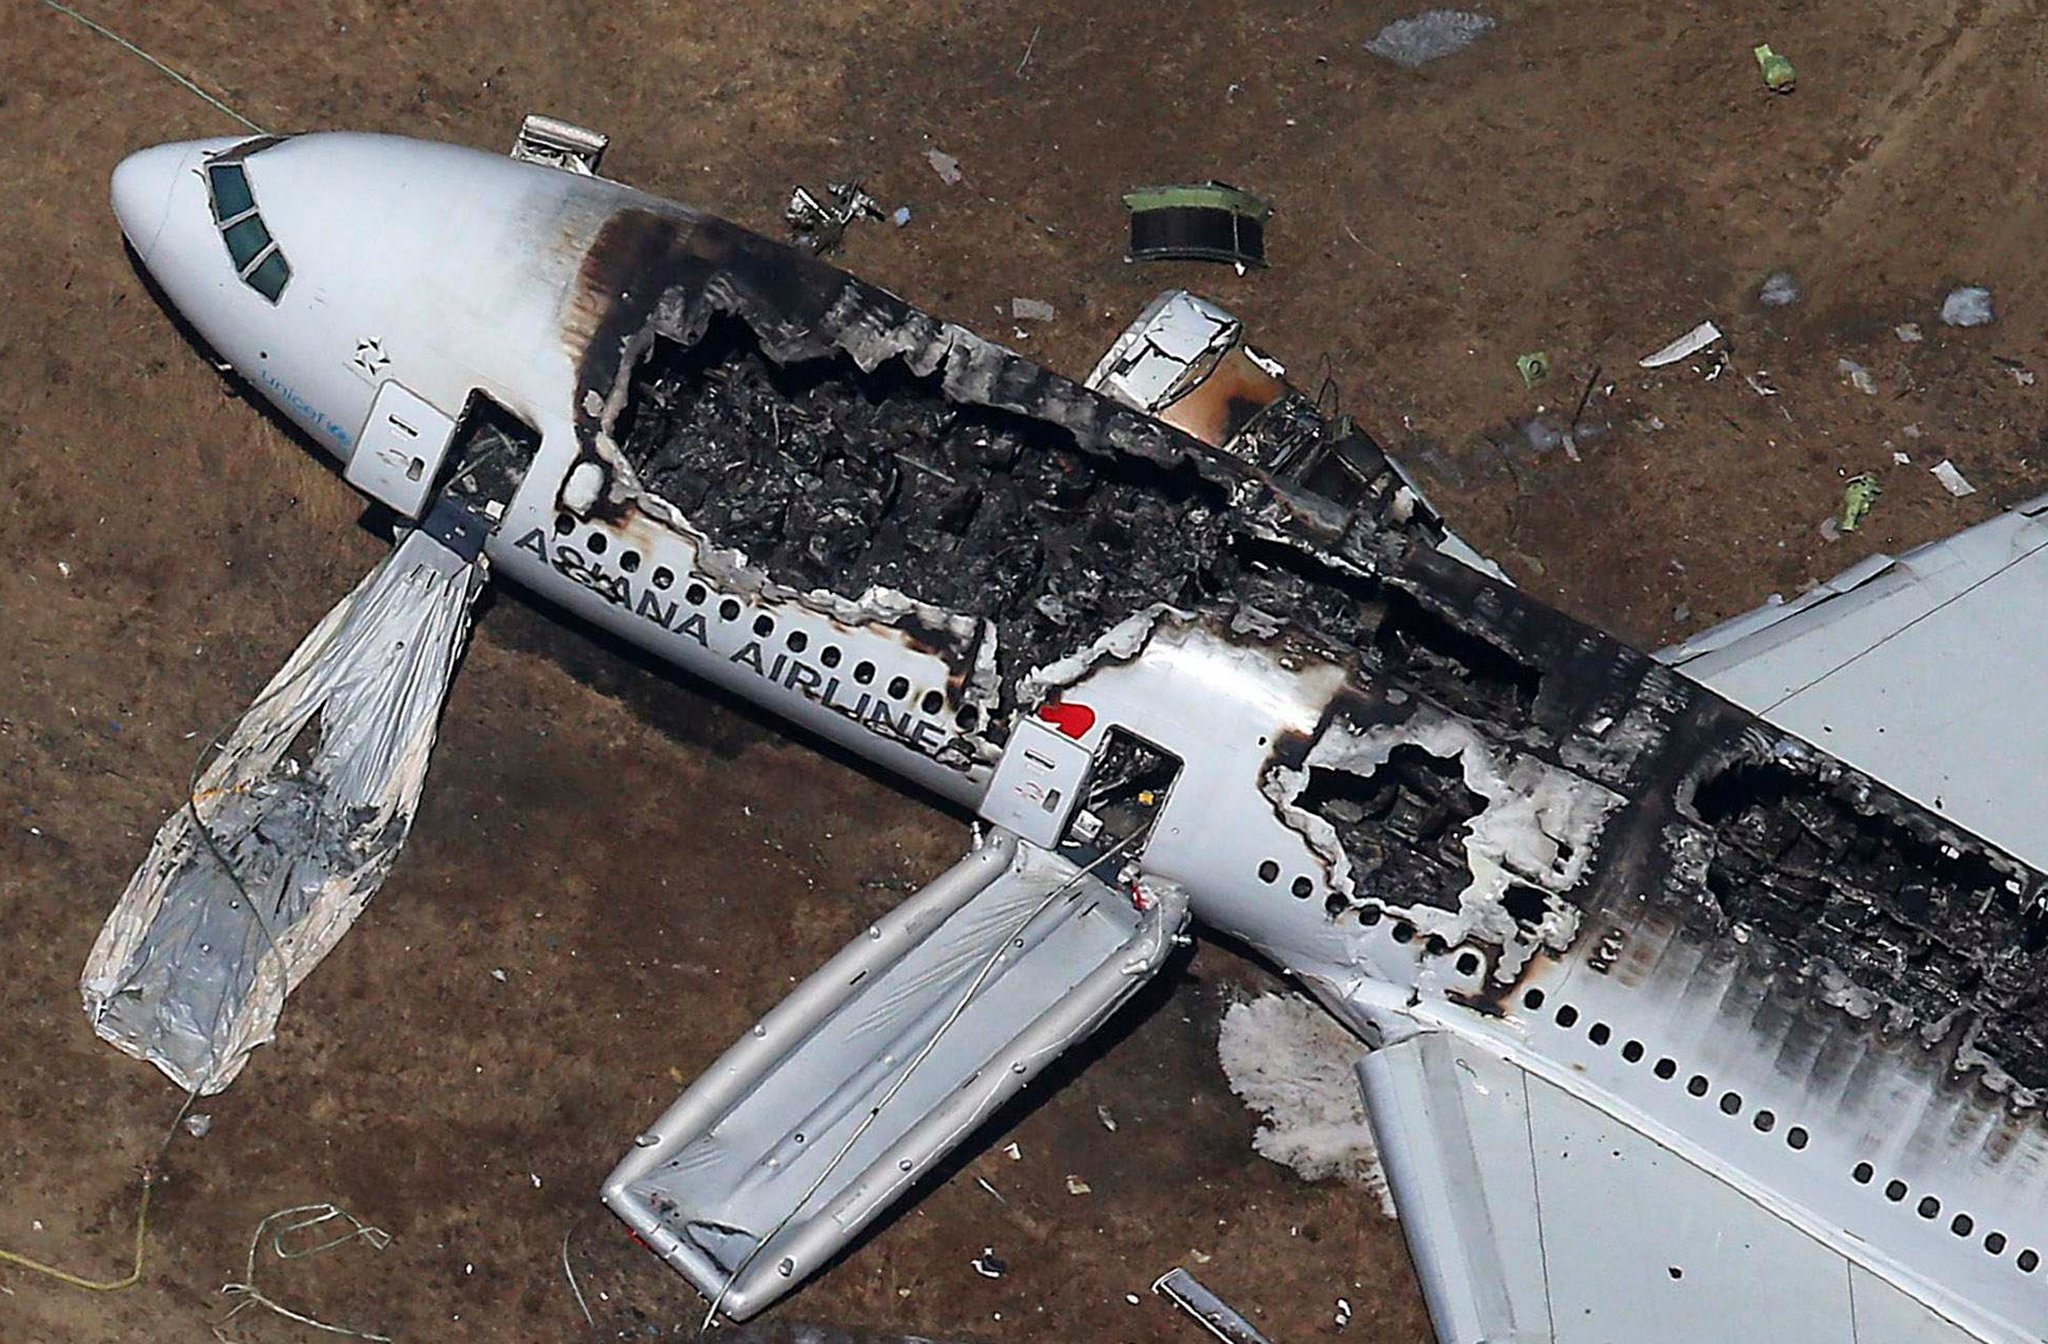 Readers want to know: what caused the plane crash?